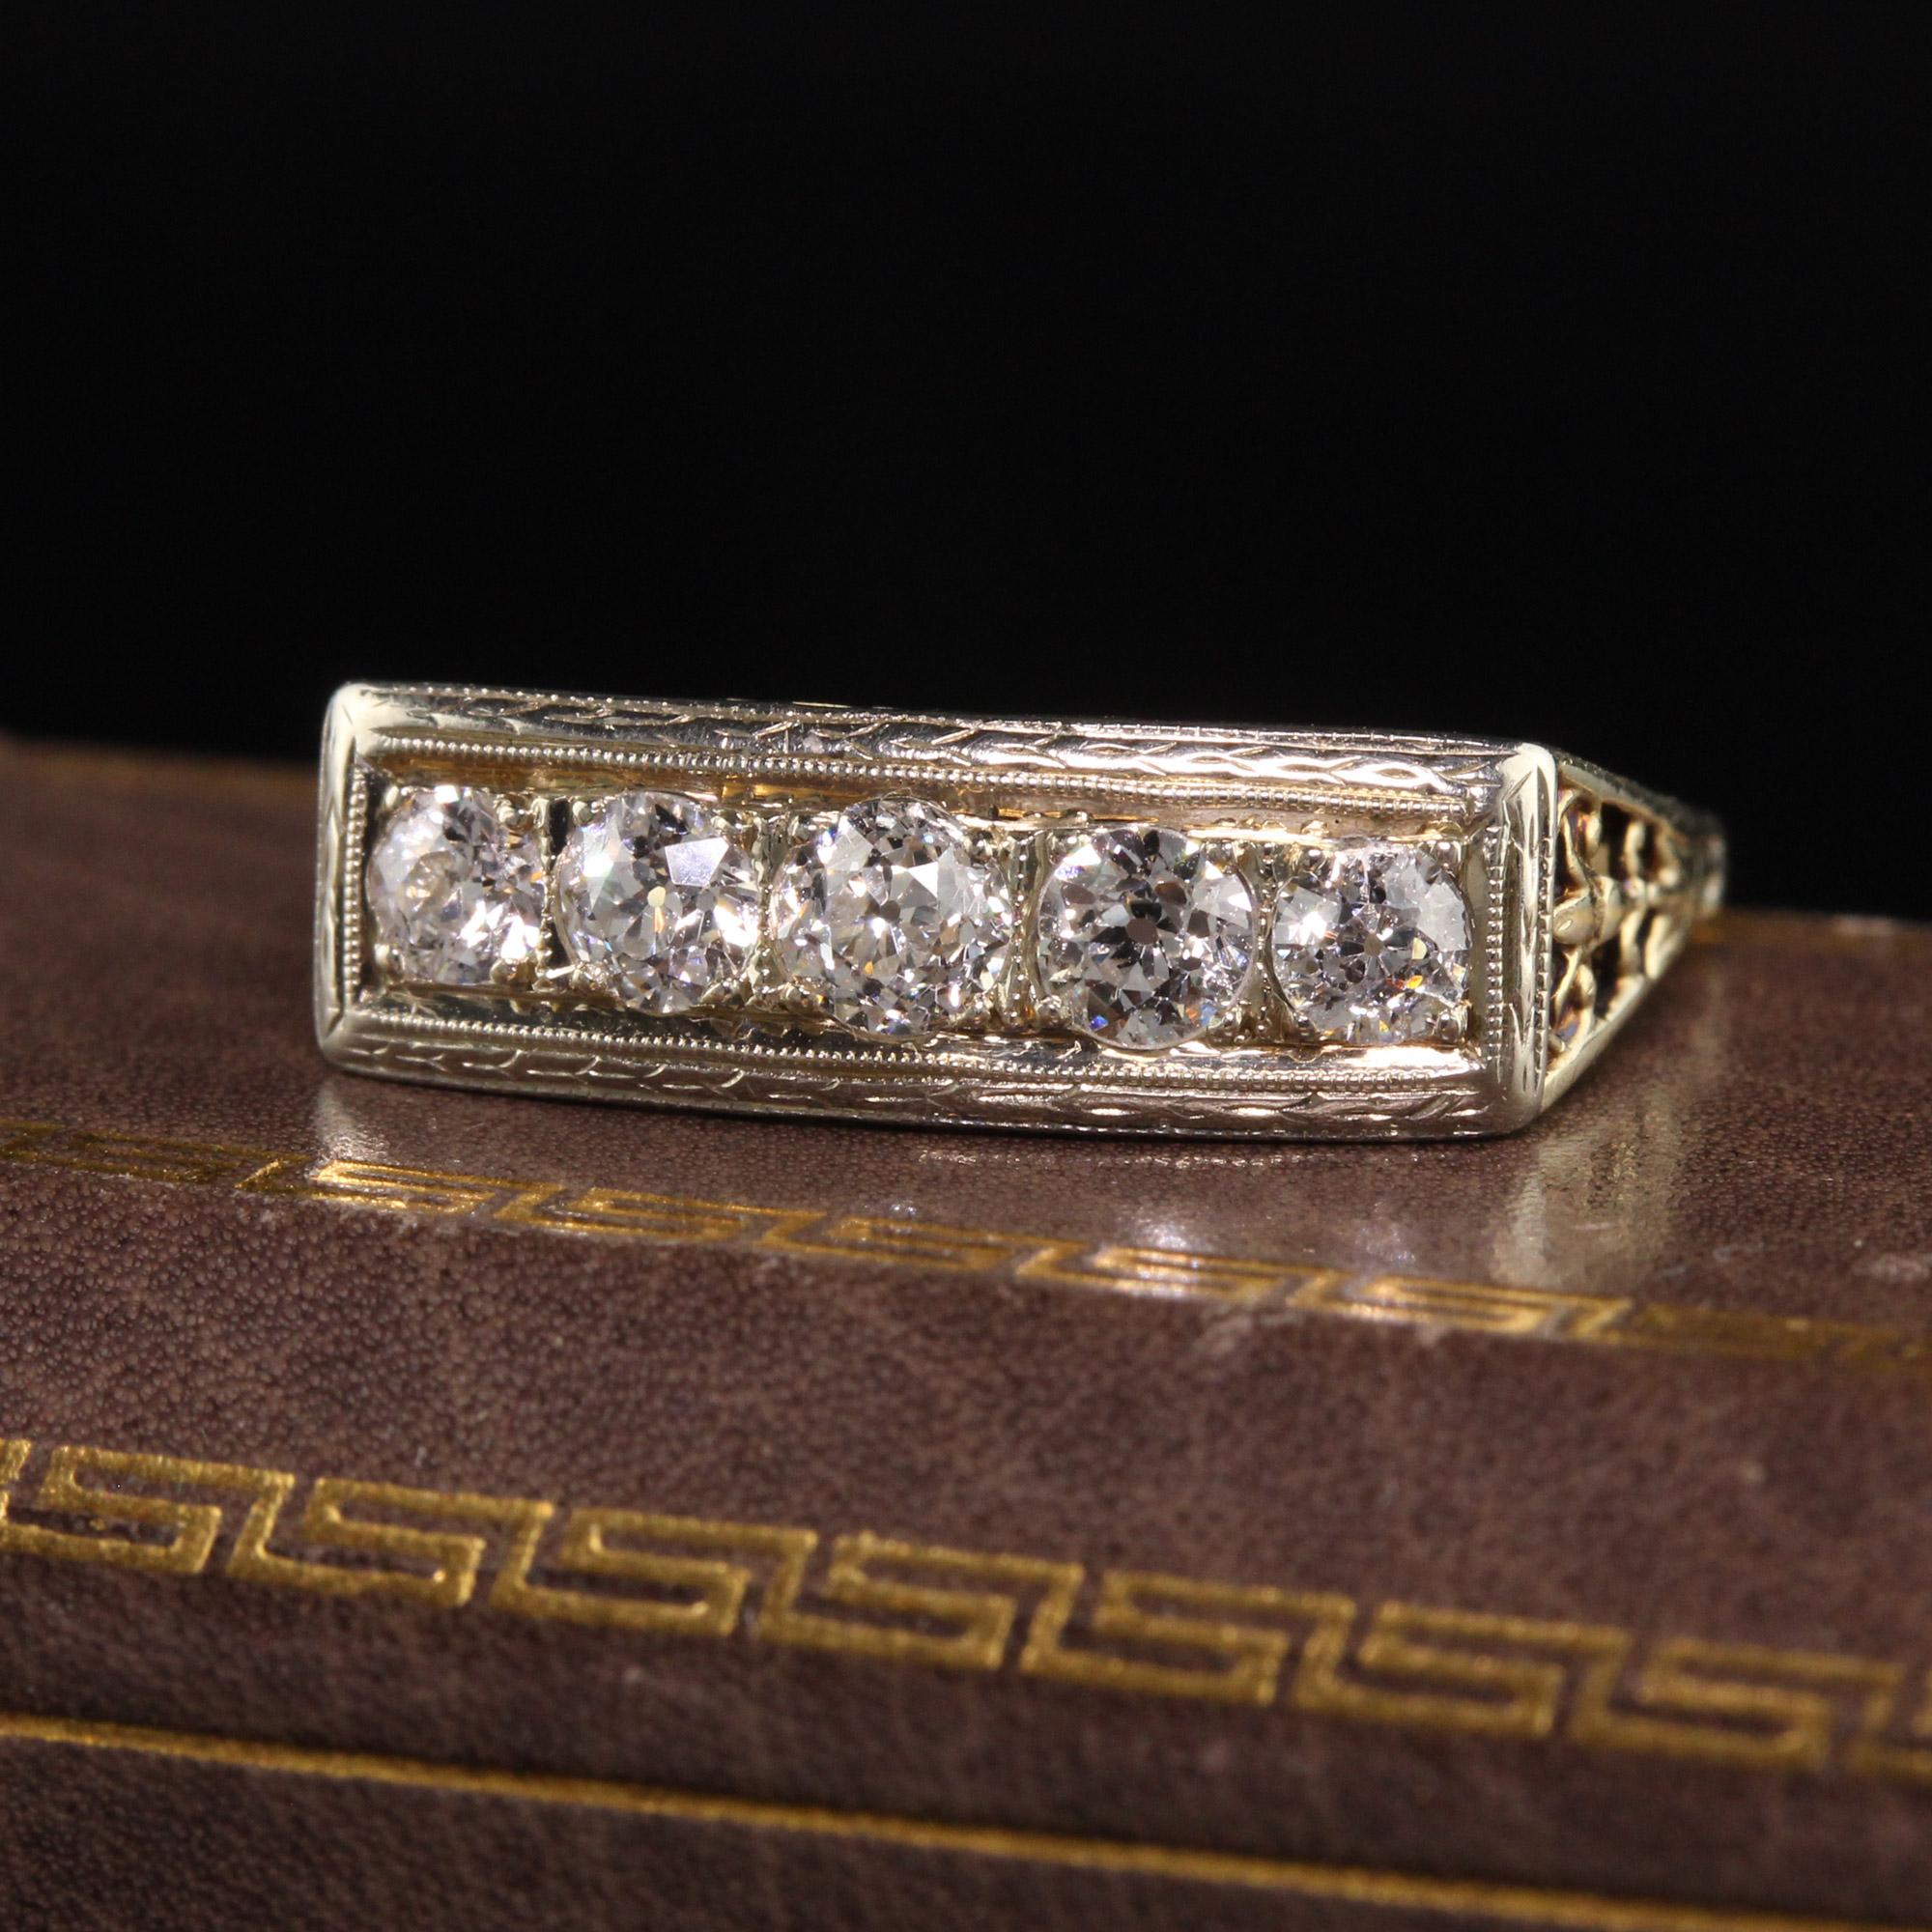 Beautiful Antique Art Deco 14K Yellow Gold Old European Five Stone Diamond Ring. This gorgeous ring is crafted in 14k yellow gold. The ring holds five old european cut diamonds on top with gorgeous filigree and engravings.

Item #R1345

Metal: 14K